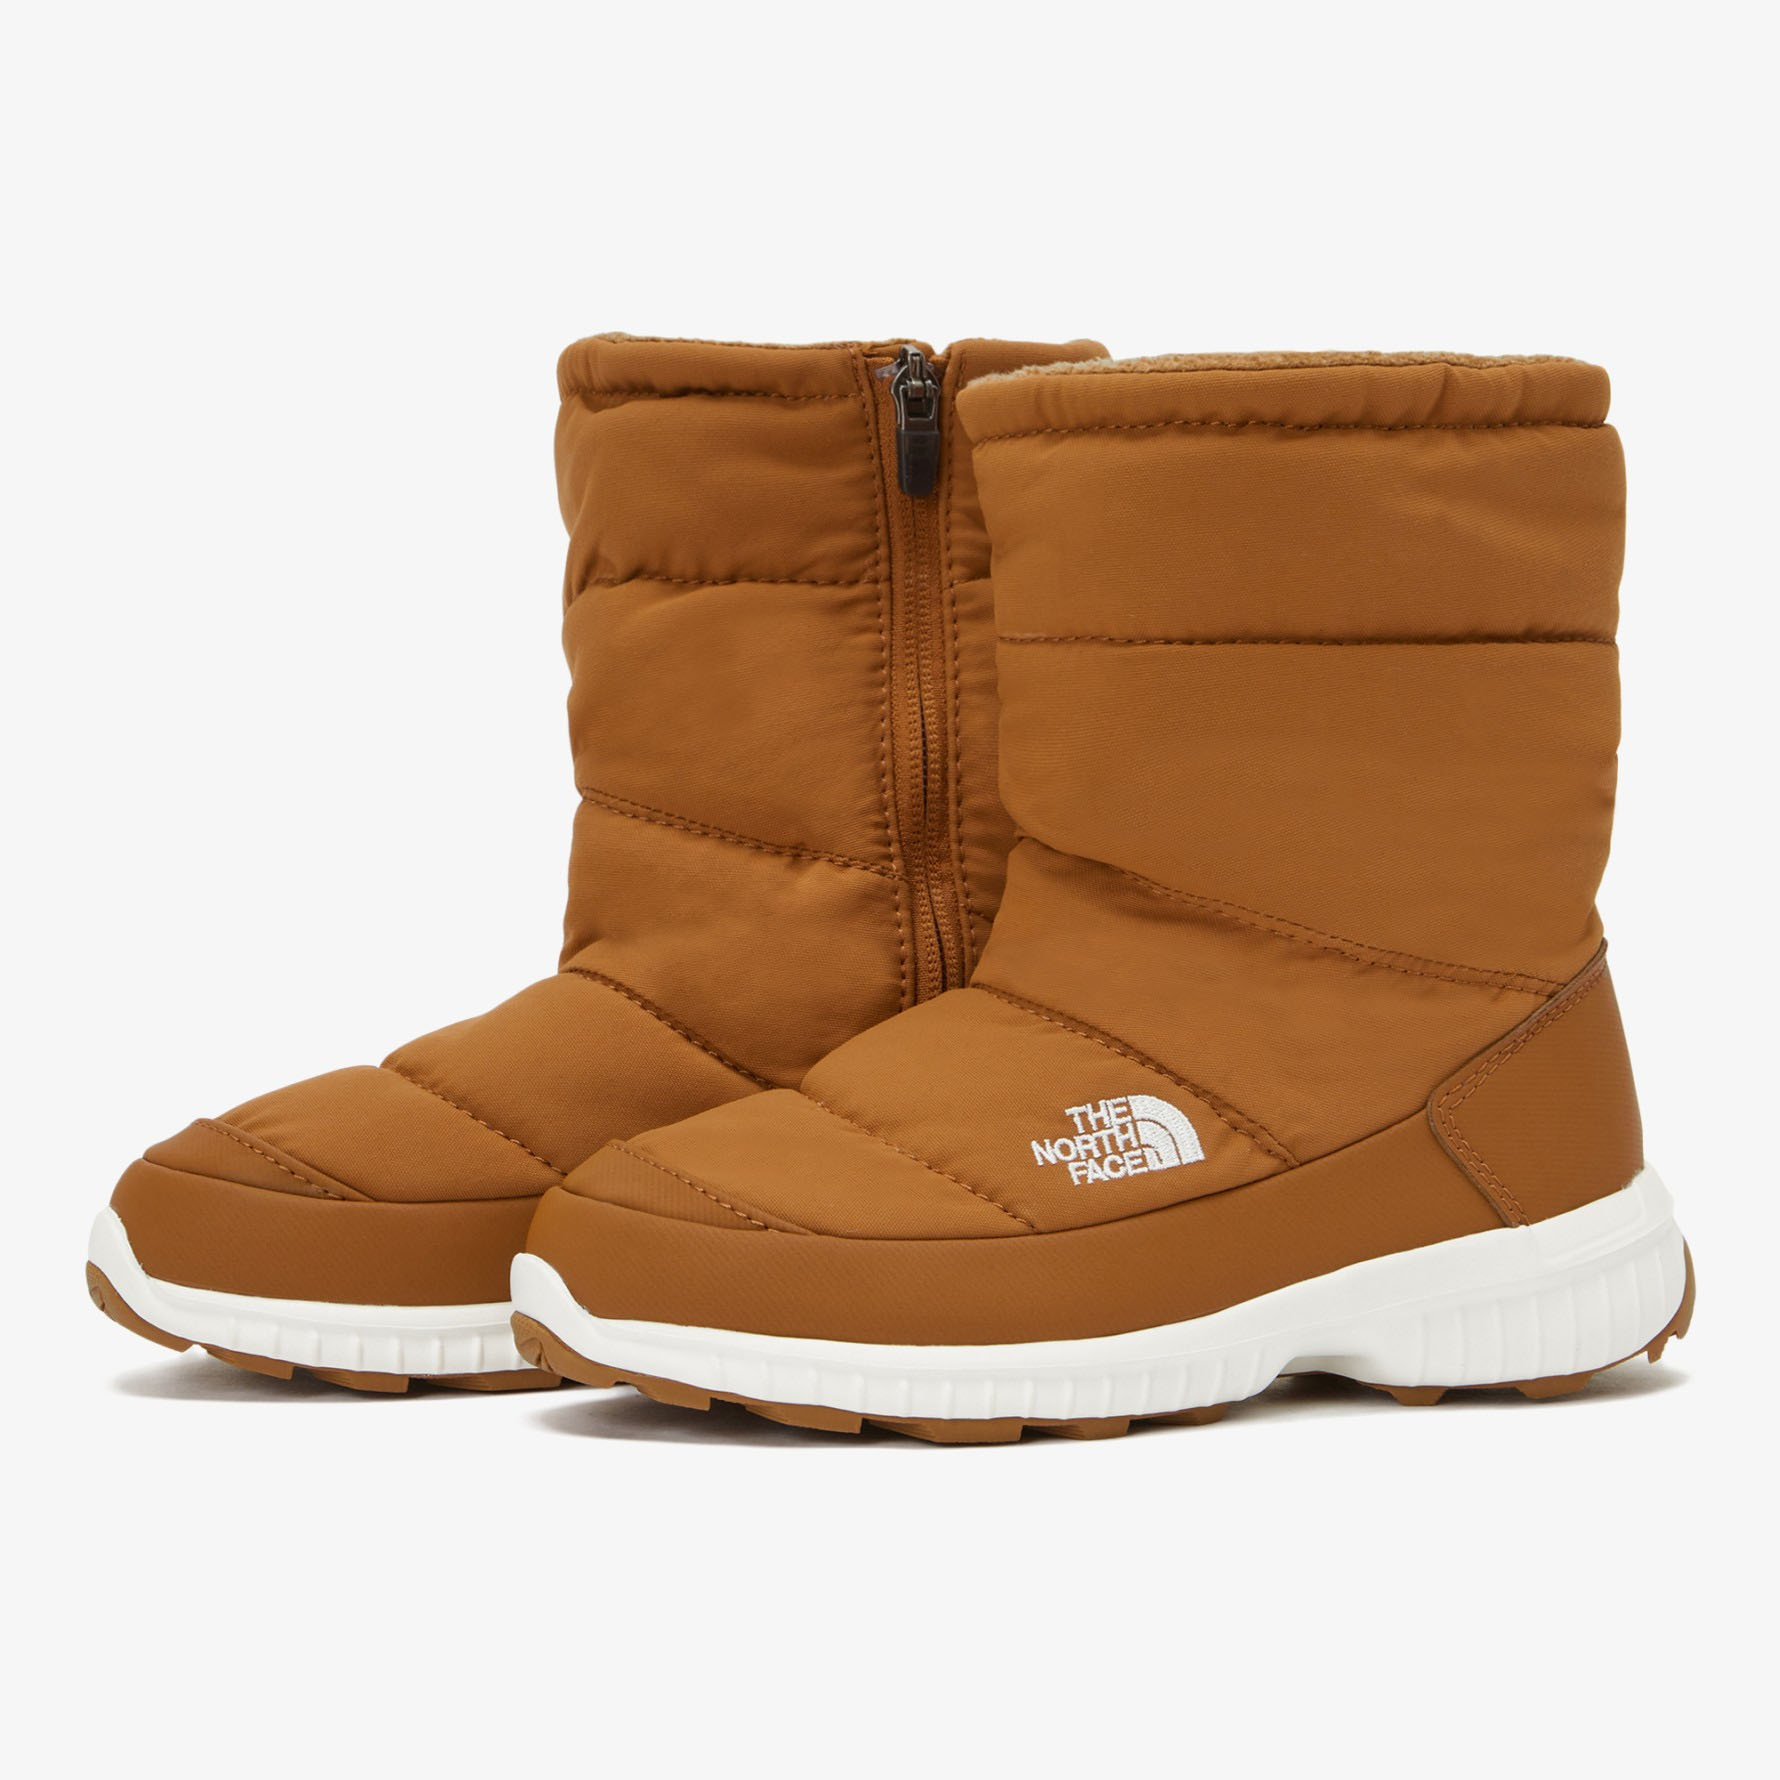 THE NORTH FACE ノースフェイス キッズ ブーツ KIDS BOOTIE CLASSIC...